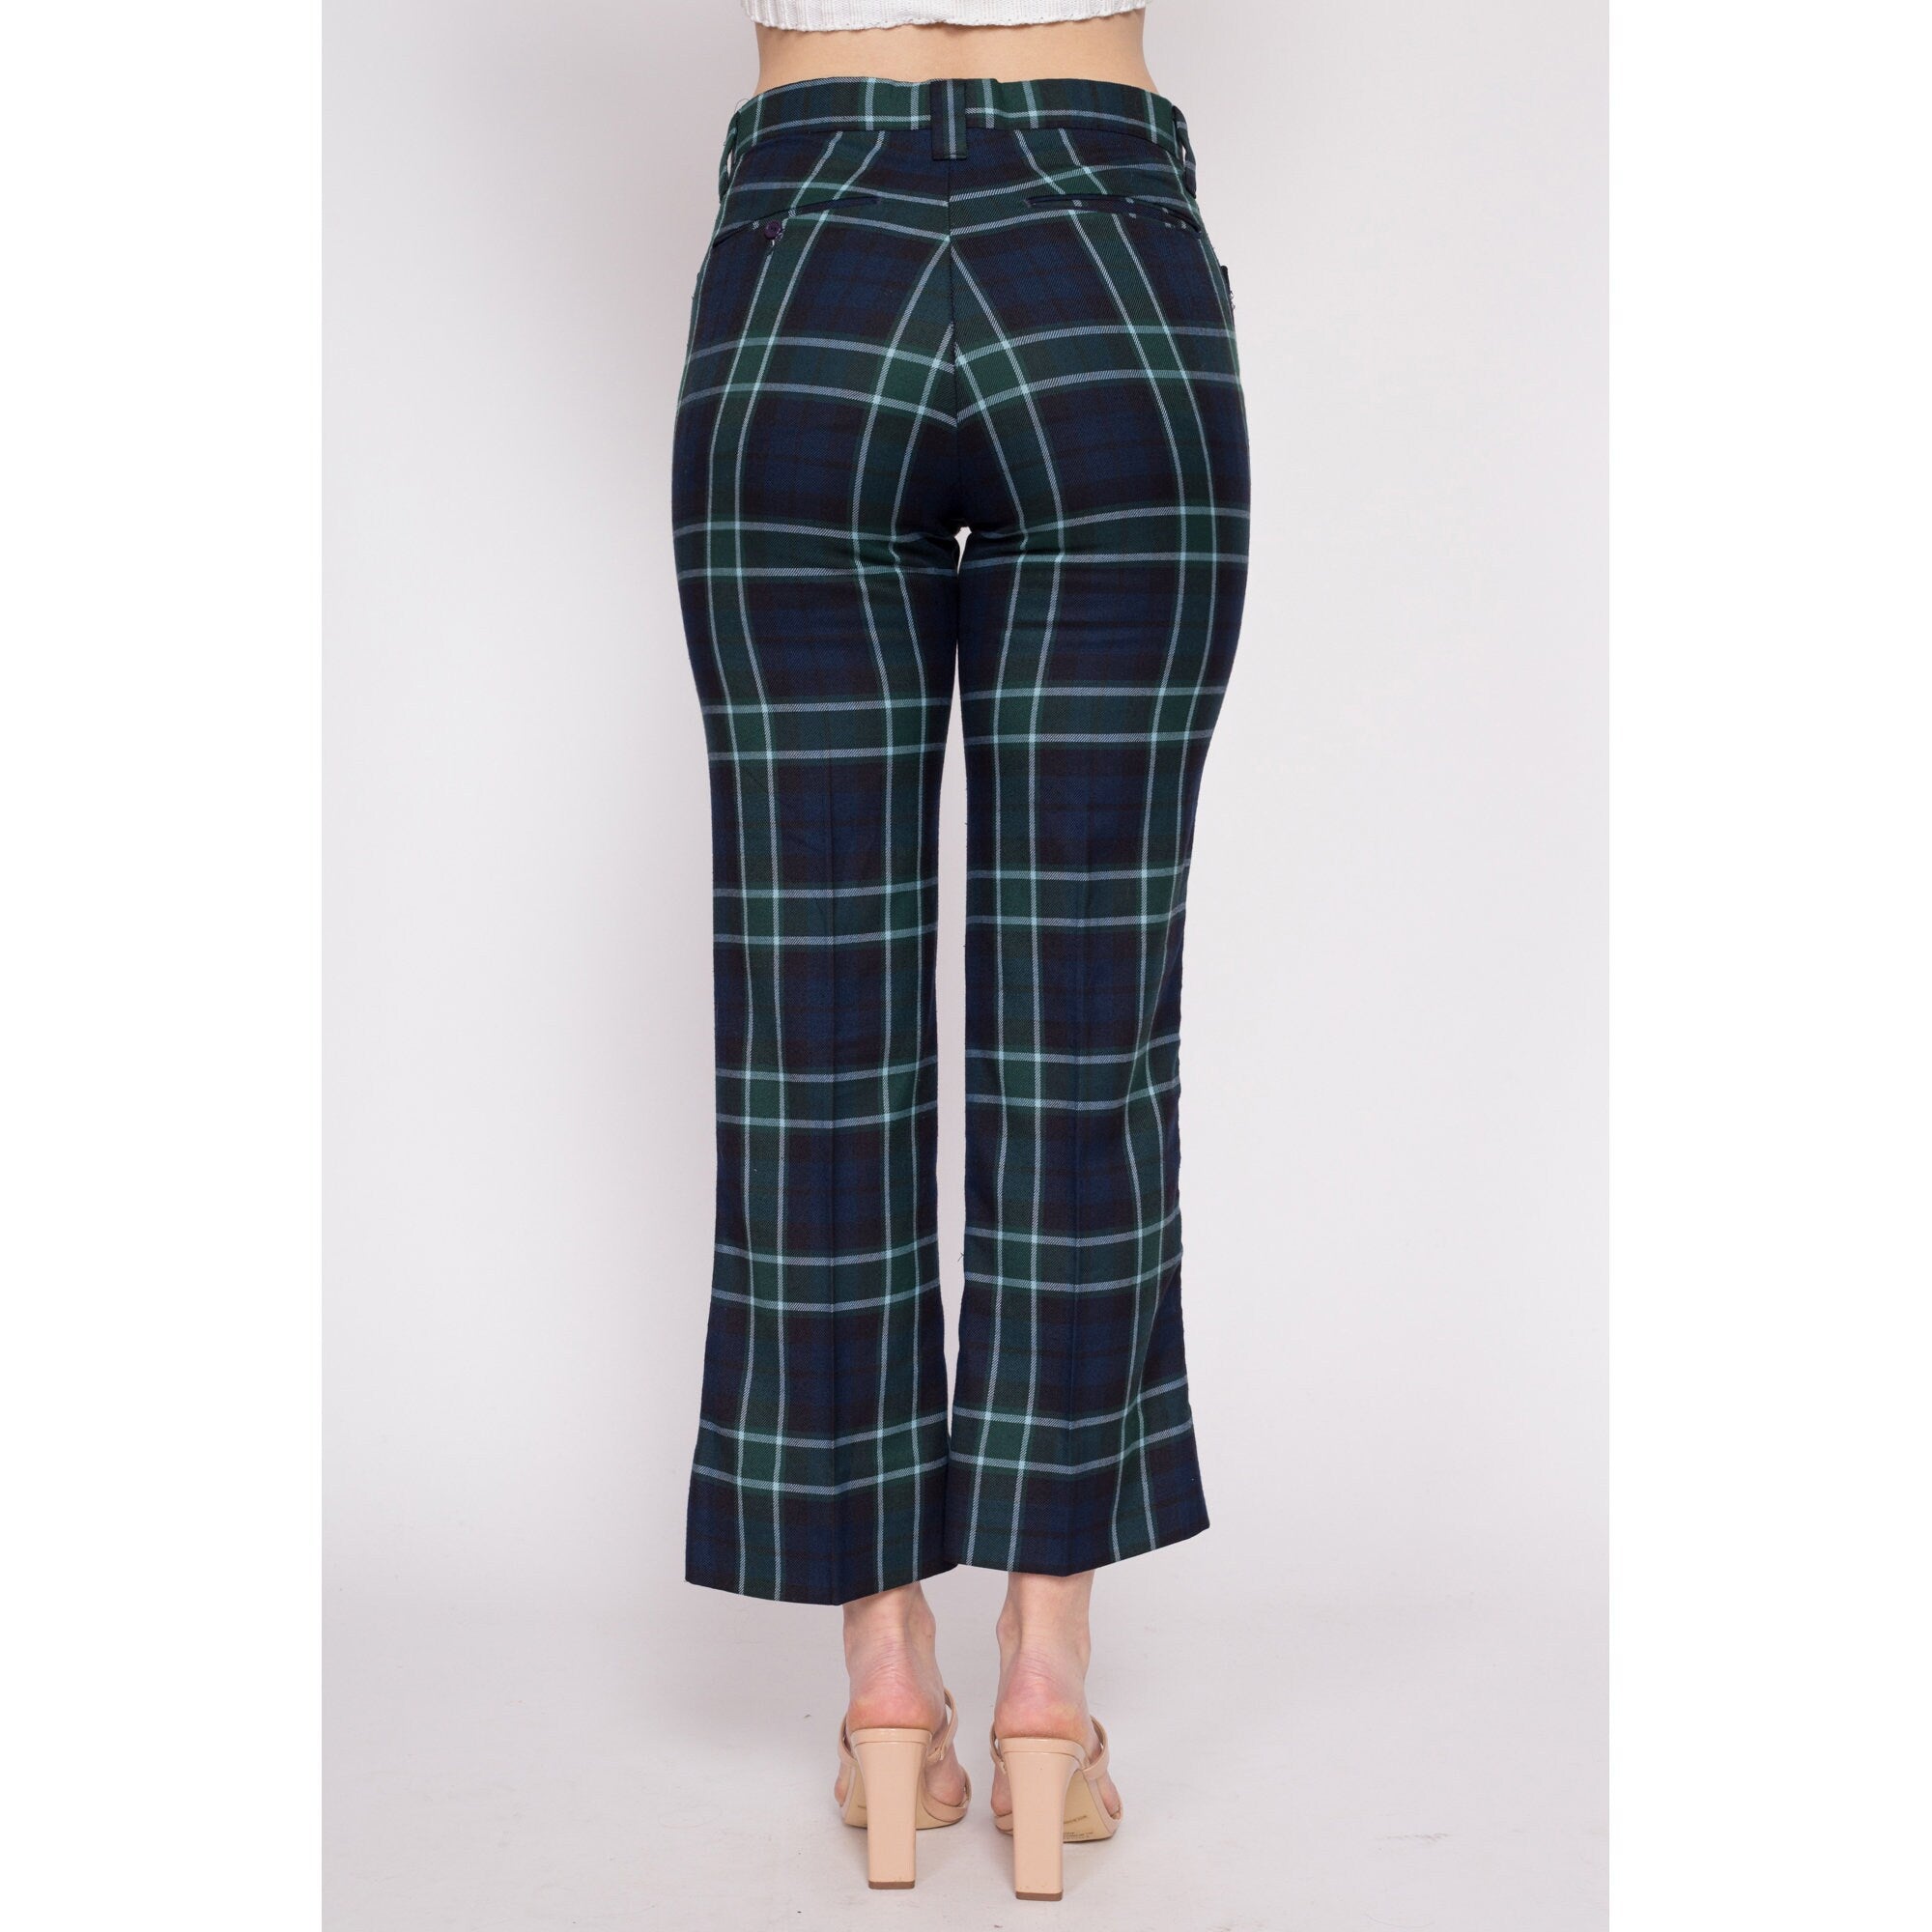 How to Wear Green Plaid Pants: Top 13 Stylish Outfit Ideas for Ladies -  FMag.com